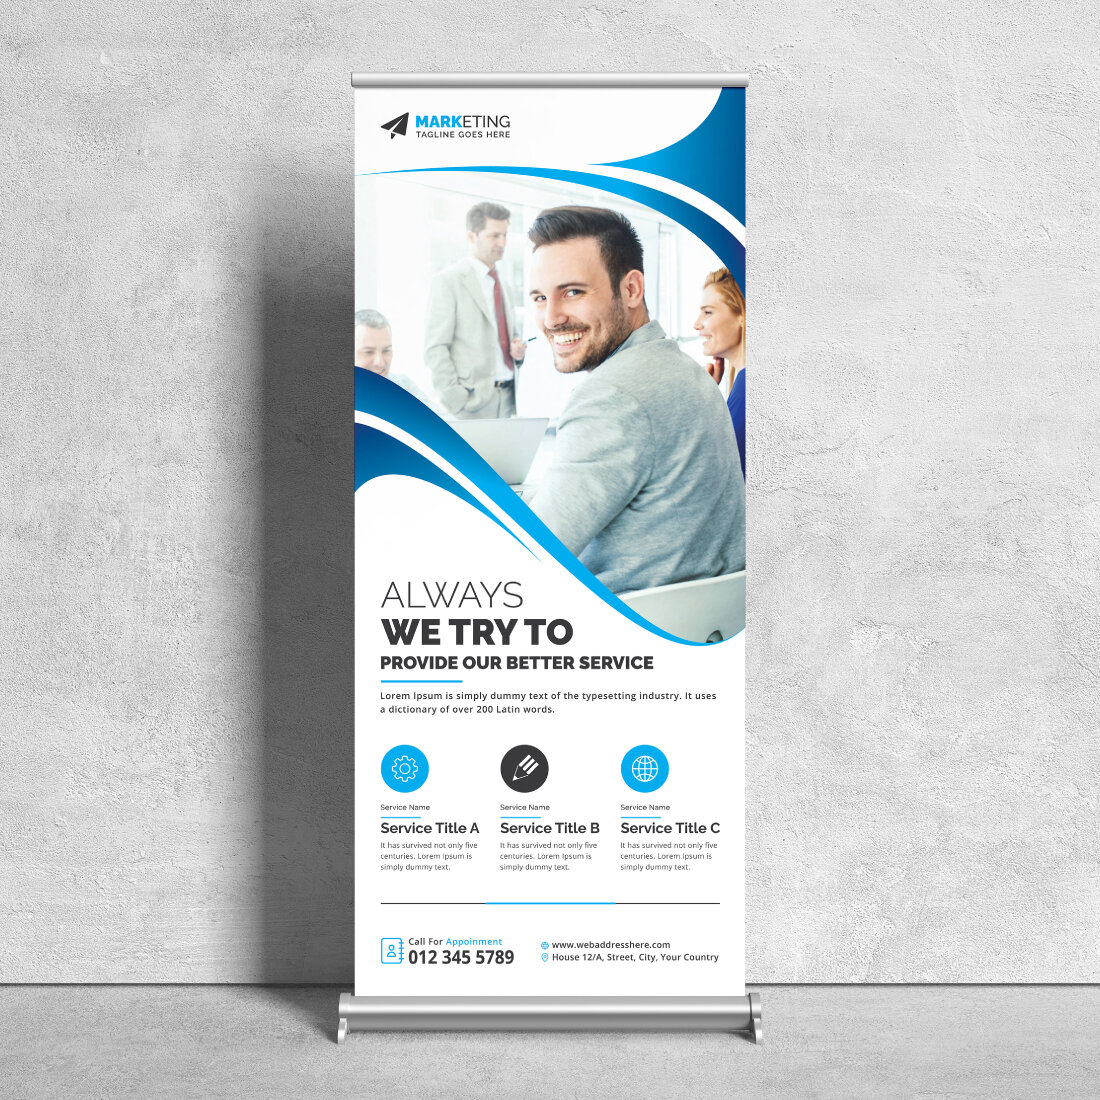 Image of corporate roll up banner in exquisite blue design